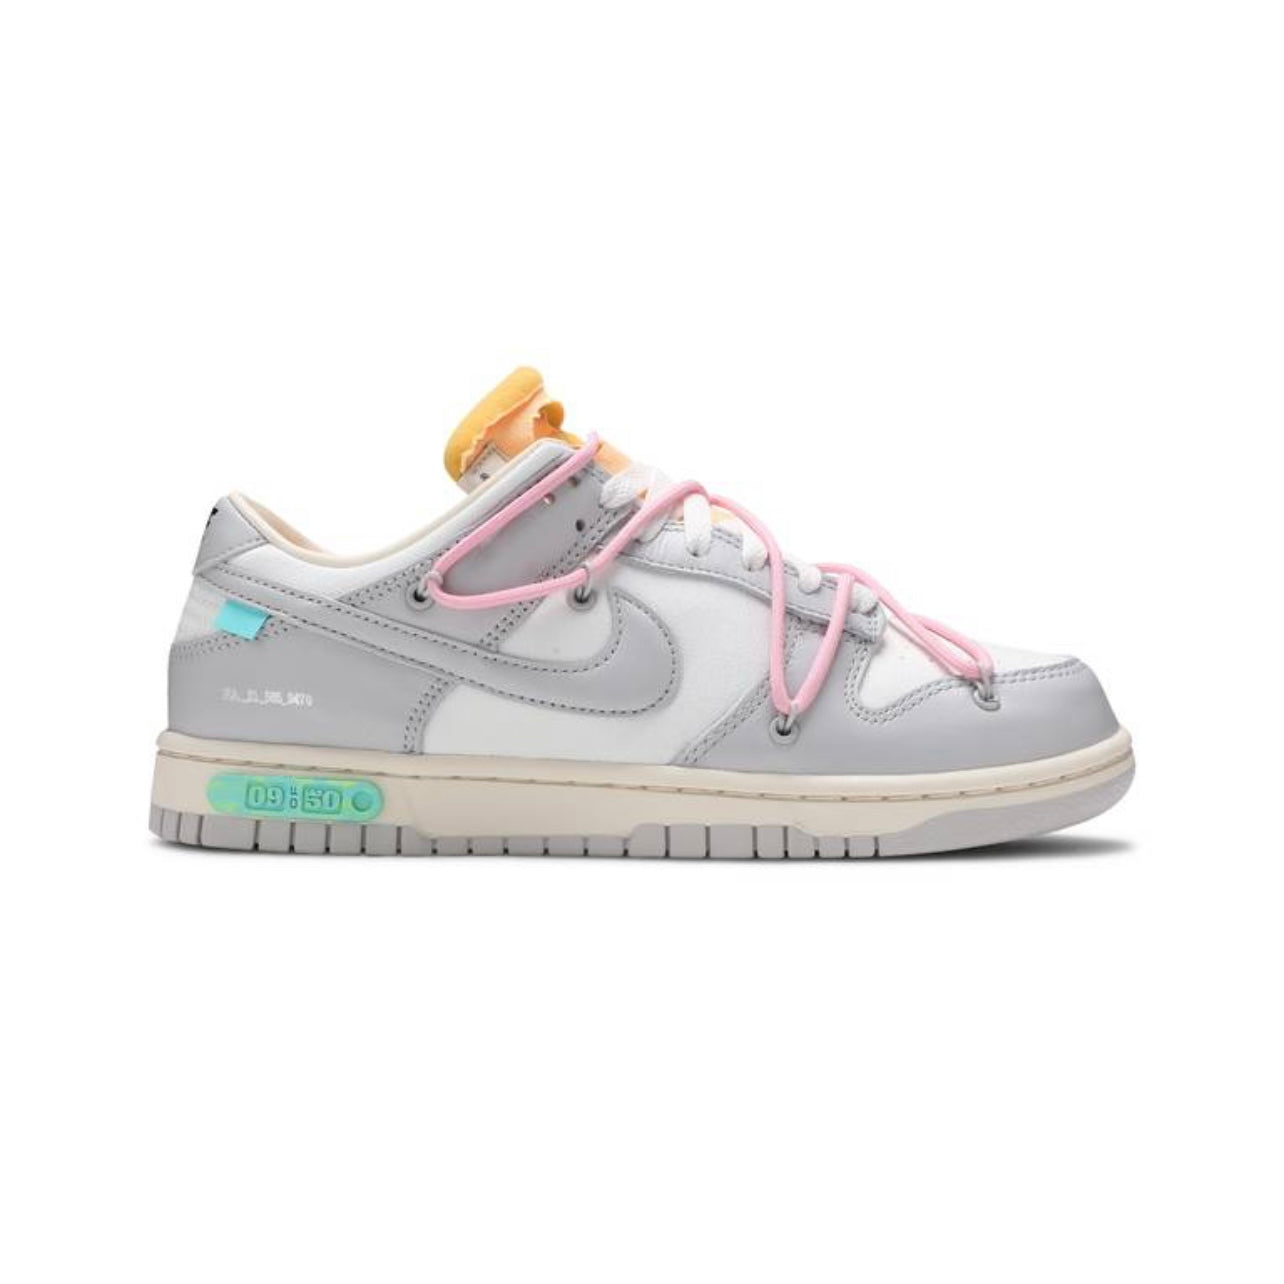 Off white x Nike Dunk Low "Lot 9 of 50"